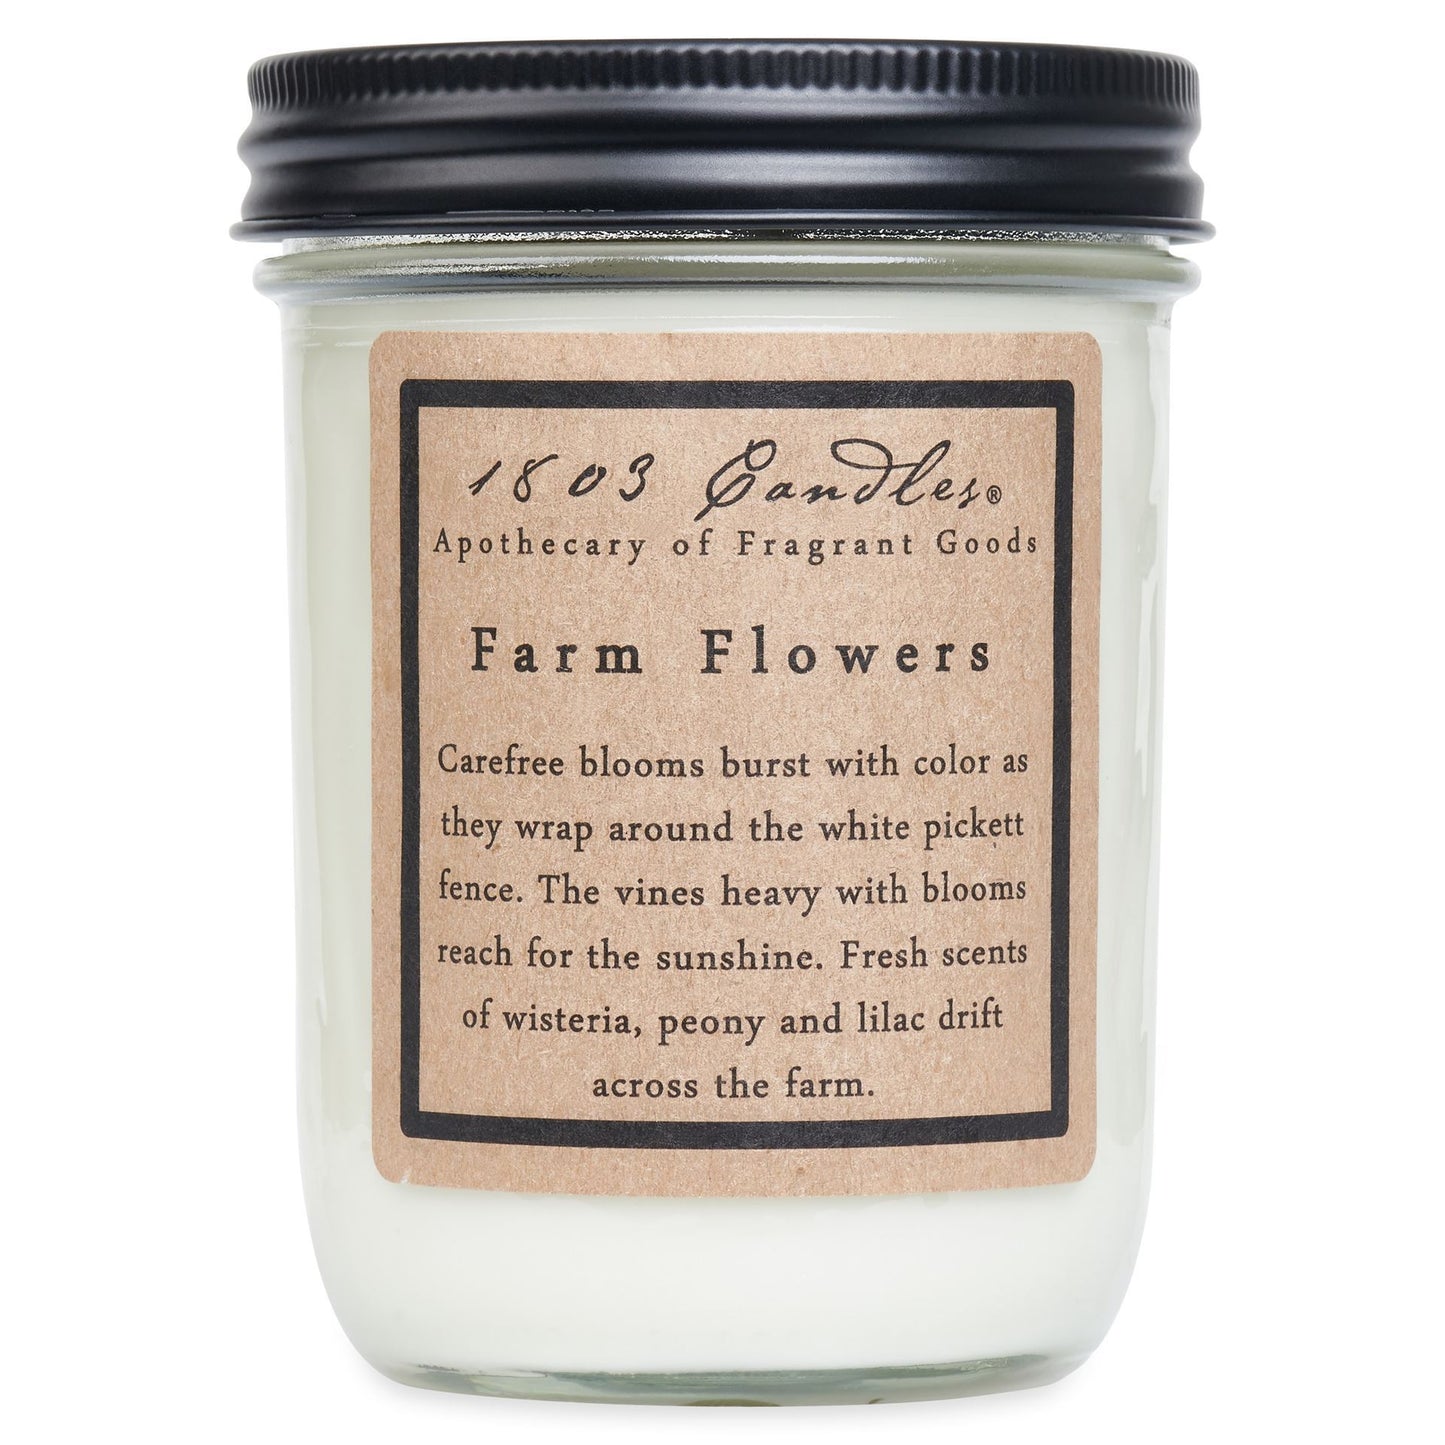 Farm Flowers 1803 Candle